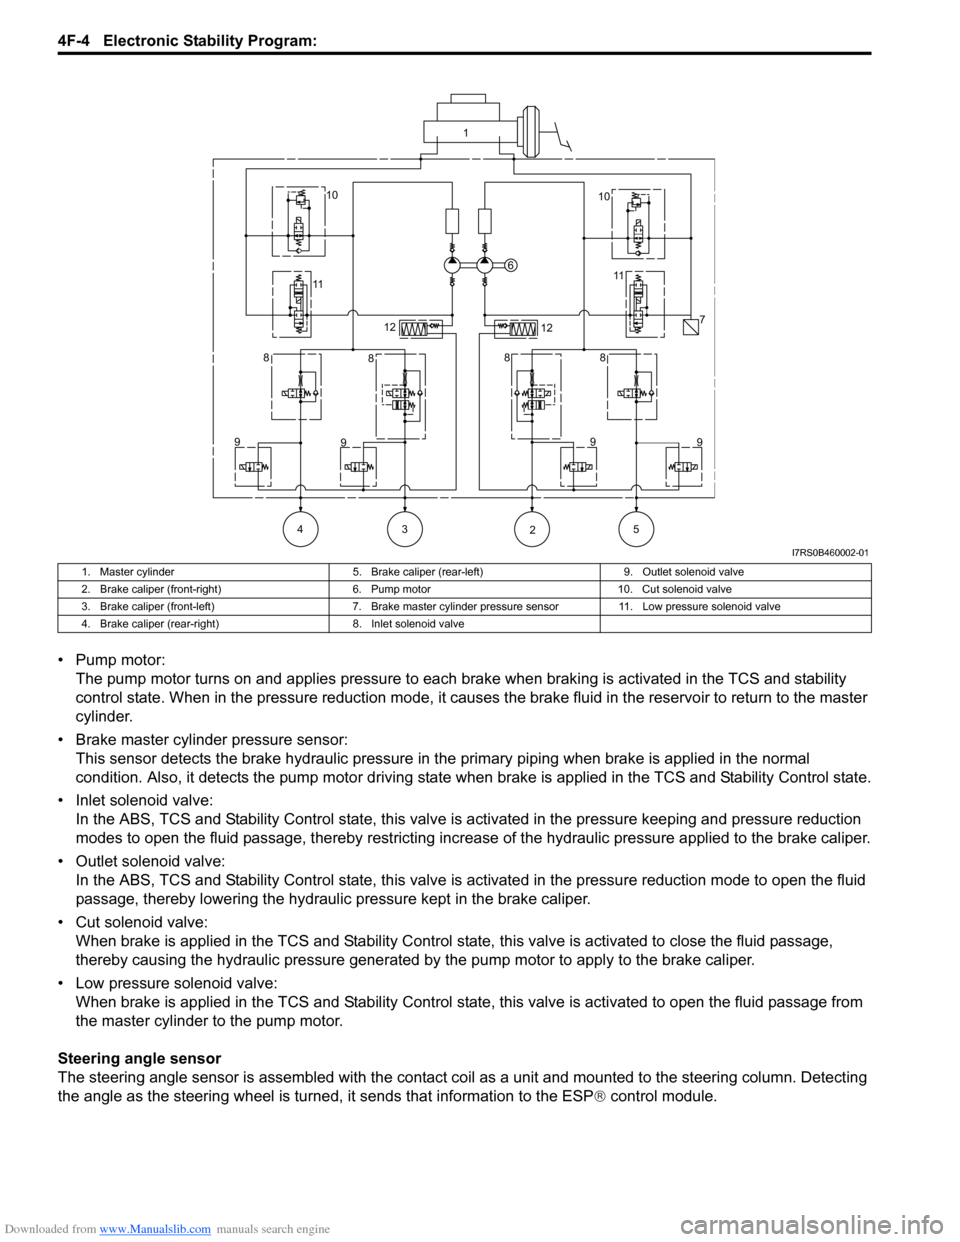 SUZUKI SWIFT 2006 2.G Service Repair Manual Downloaded from www.Manualslib.com manuals search engine 4F-4 Electronic Stability Program: 
• Pump motor:The pump motor turns on and applies pressure to each brake when braking is activated in the 